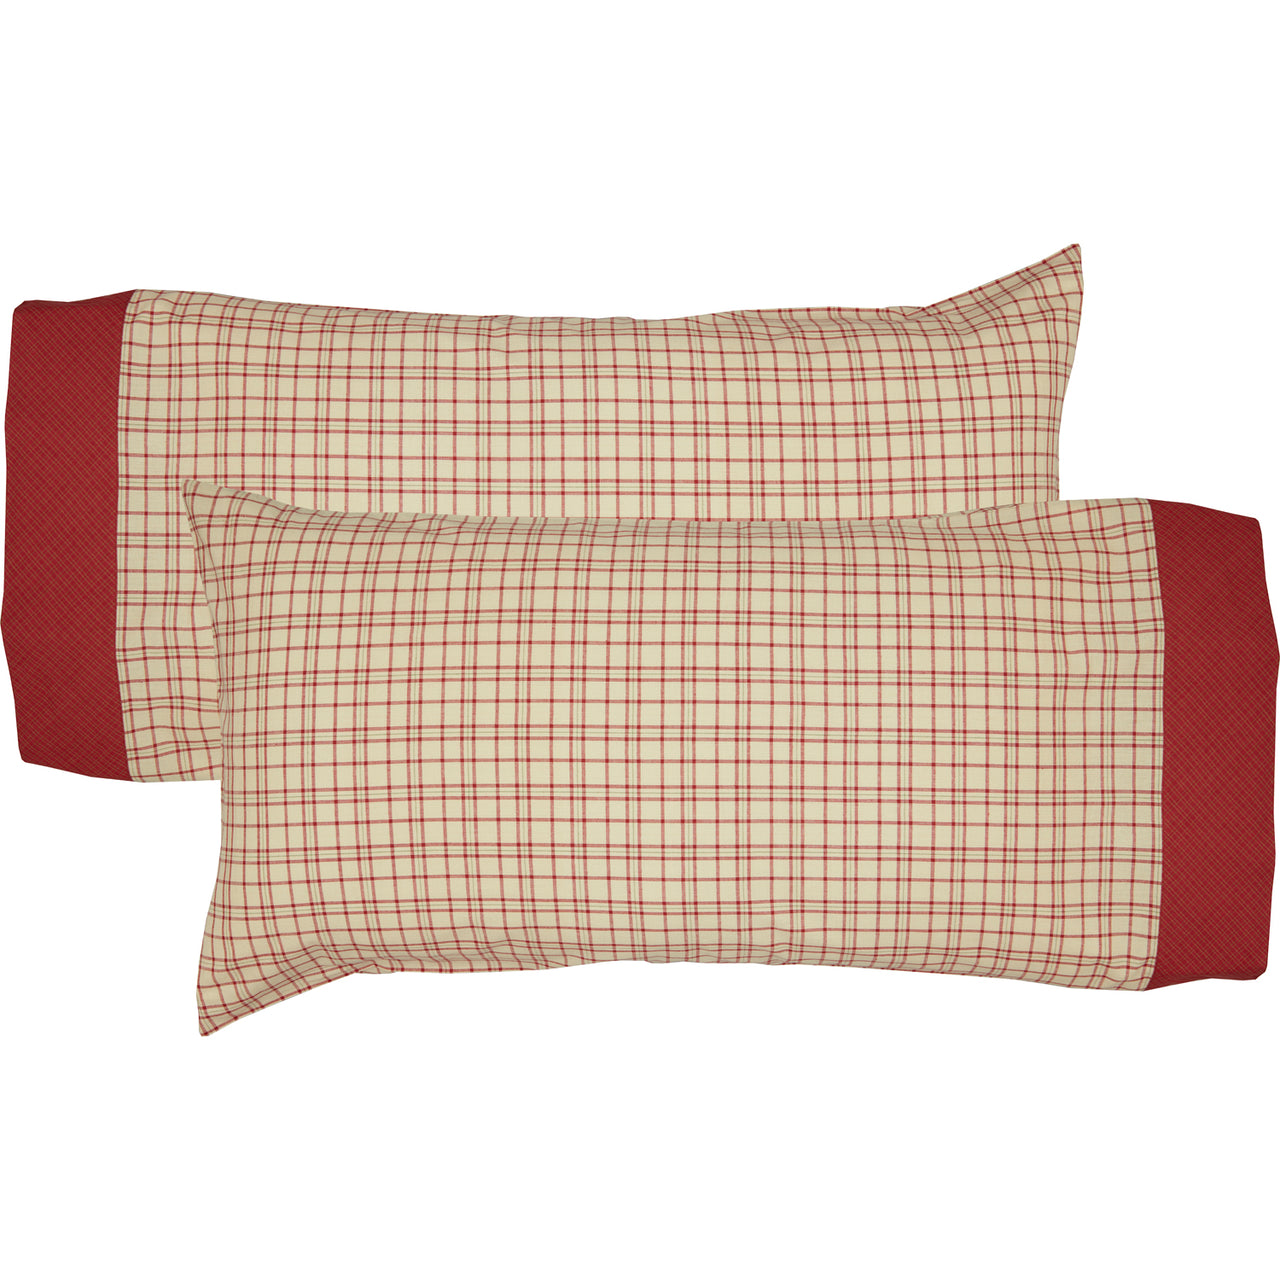 Tacoma King Pillow Case Set of 2 21x40 VHC Brands